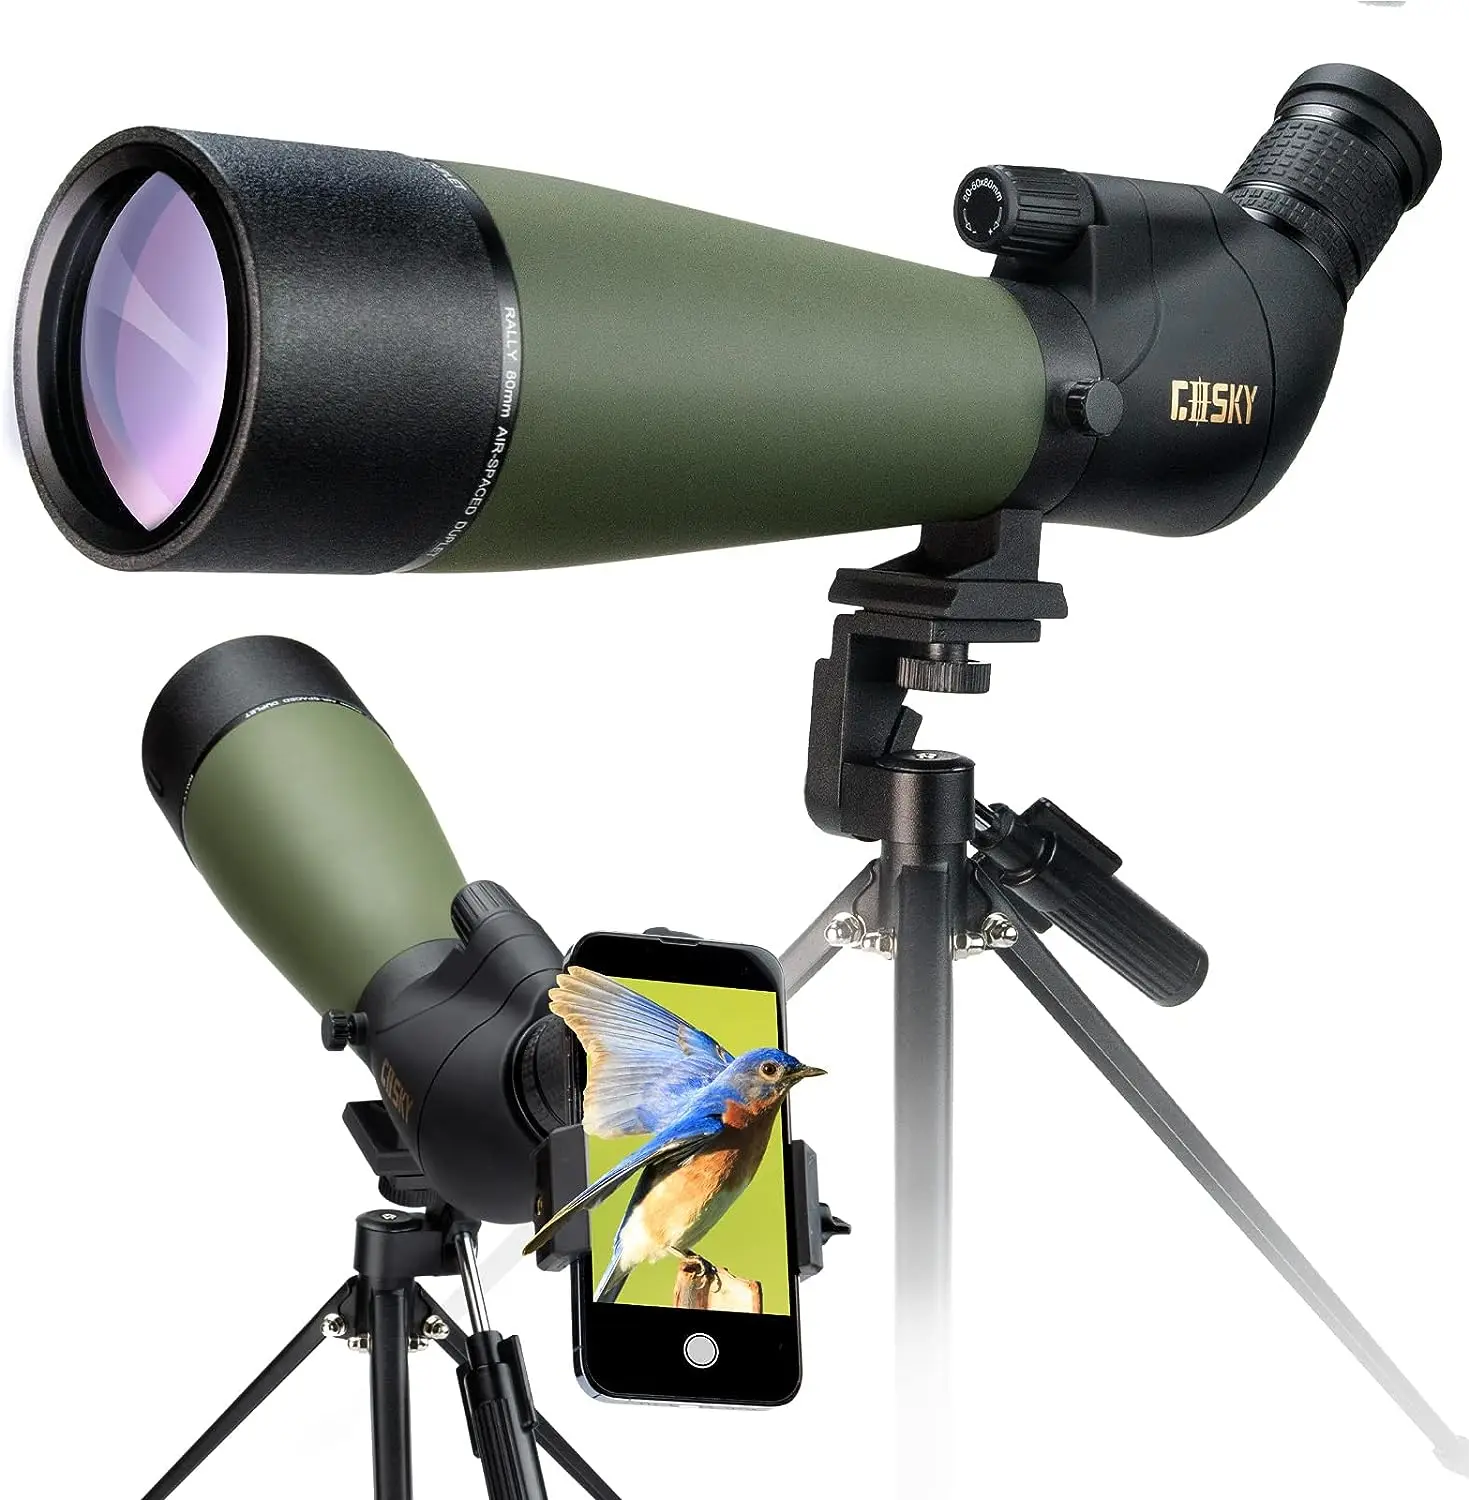 

Updated 20-60x80 Spotting Scope with Tripod, Carrying Bag - BAK4 Angled Scope for Target Shooting Hunting Bird Watching Wildlife